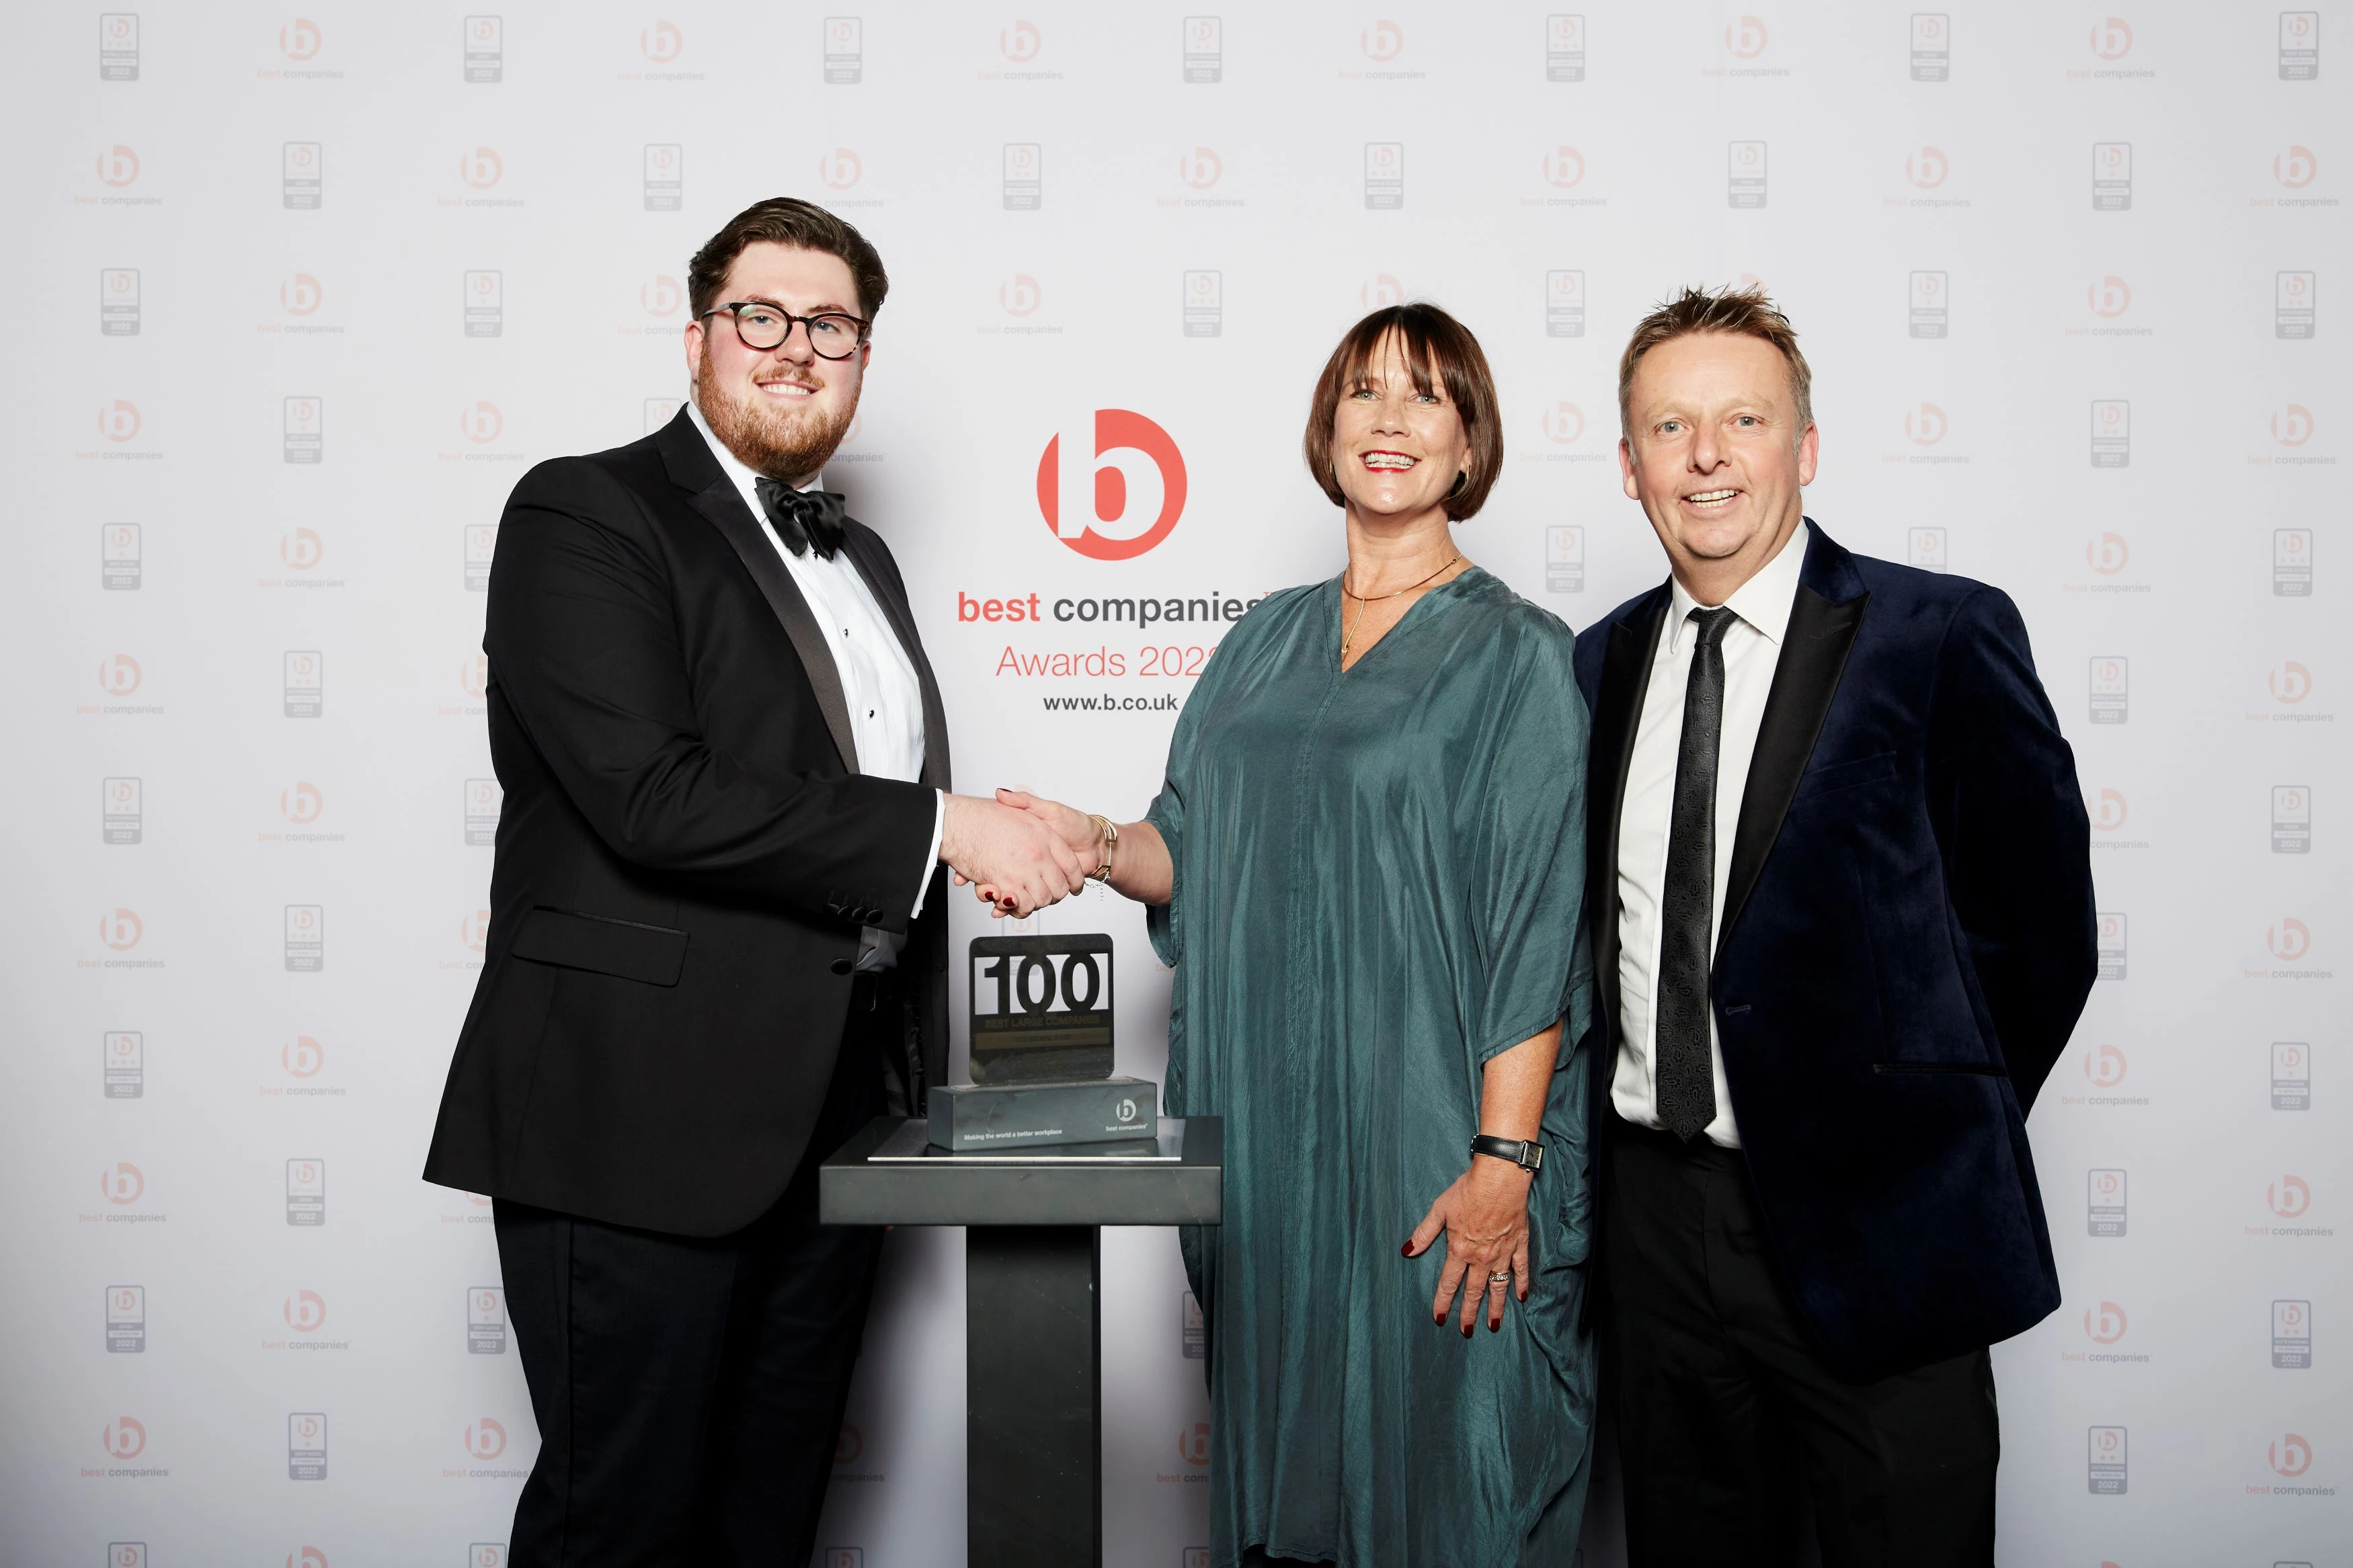 Helen Saunders and Roger Hutton (right) of Clarion being presented with the firm’s three star award in the prestigious ‘UK’s 100 Best Companies to Work For’